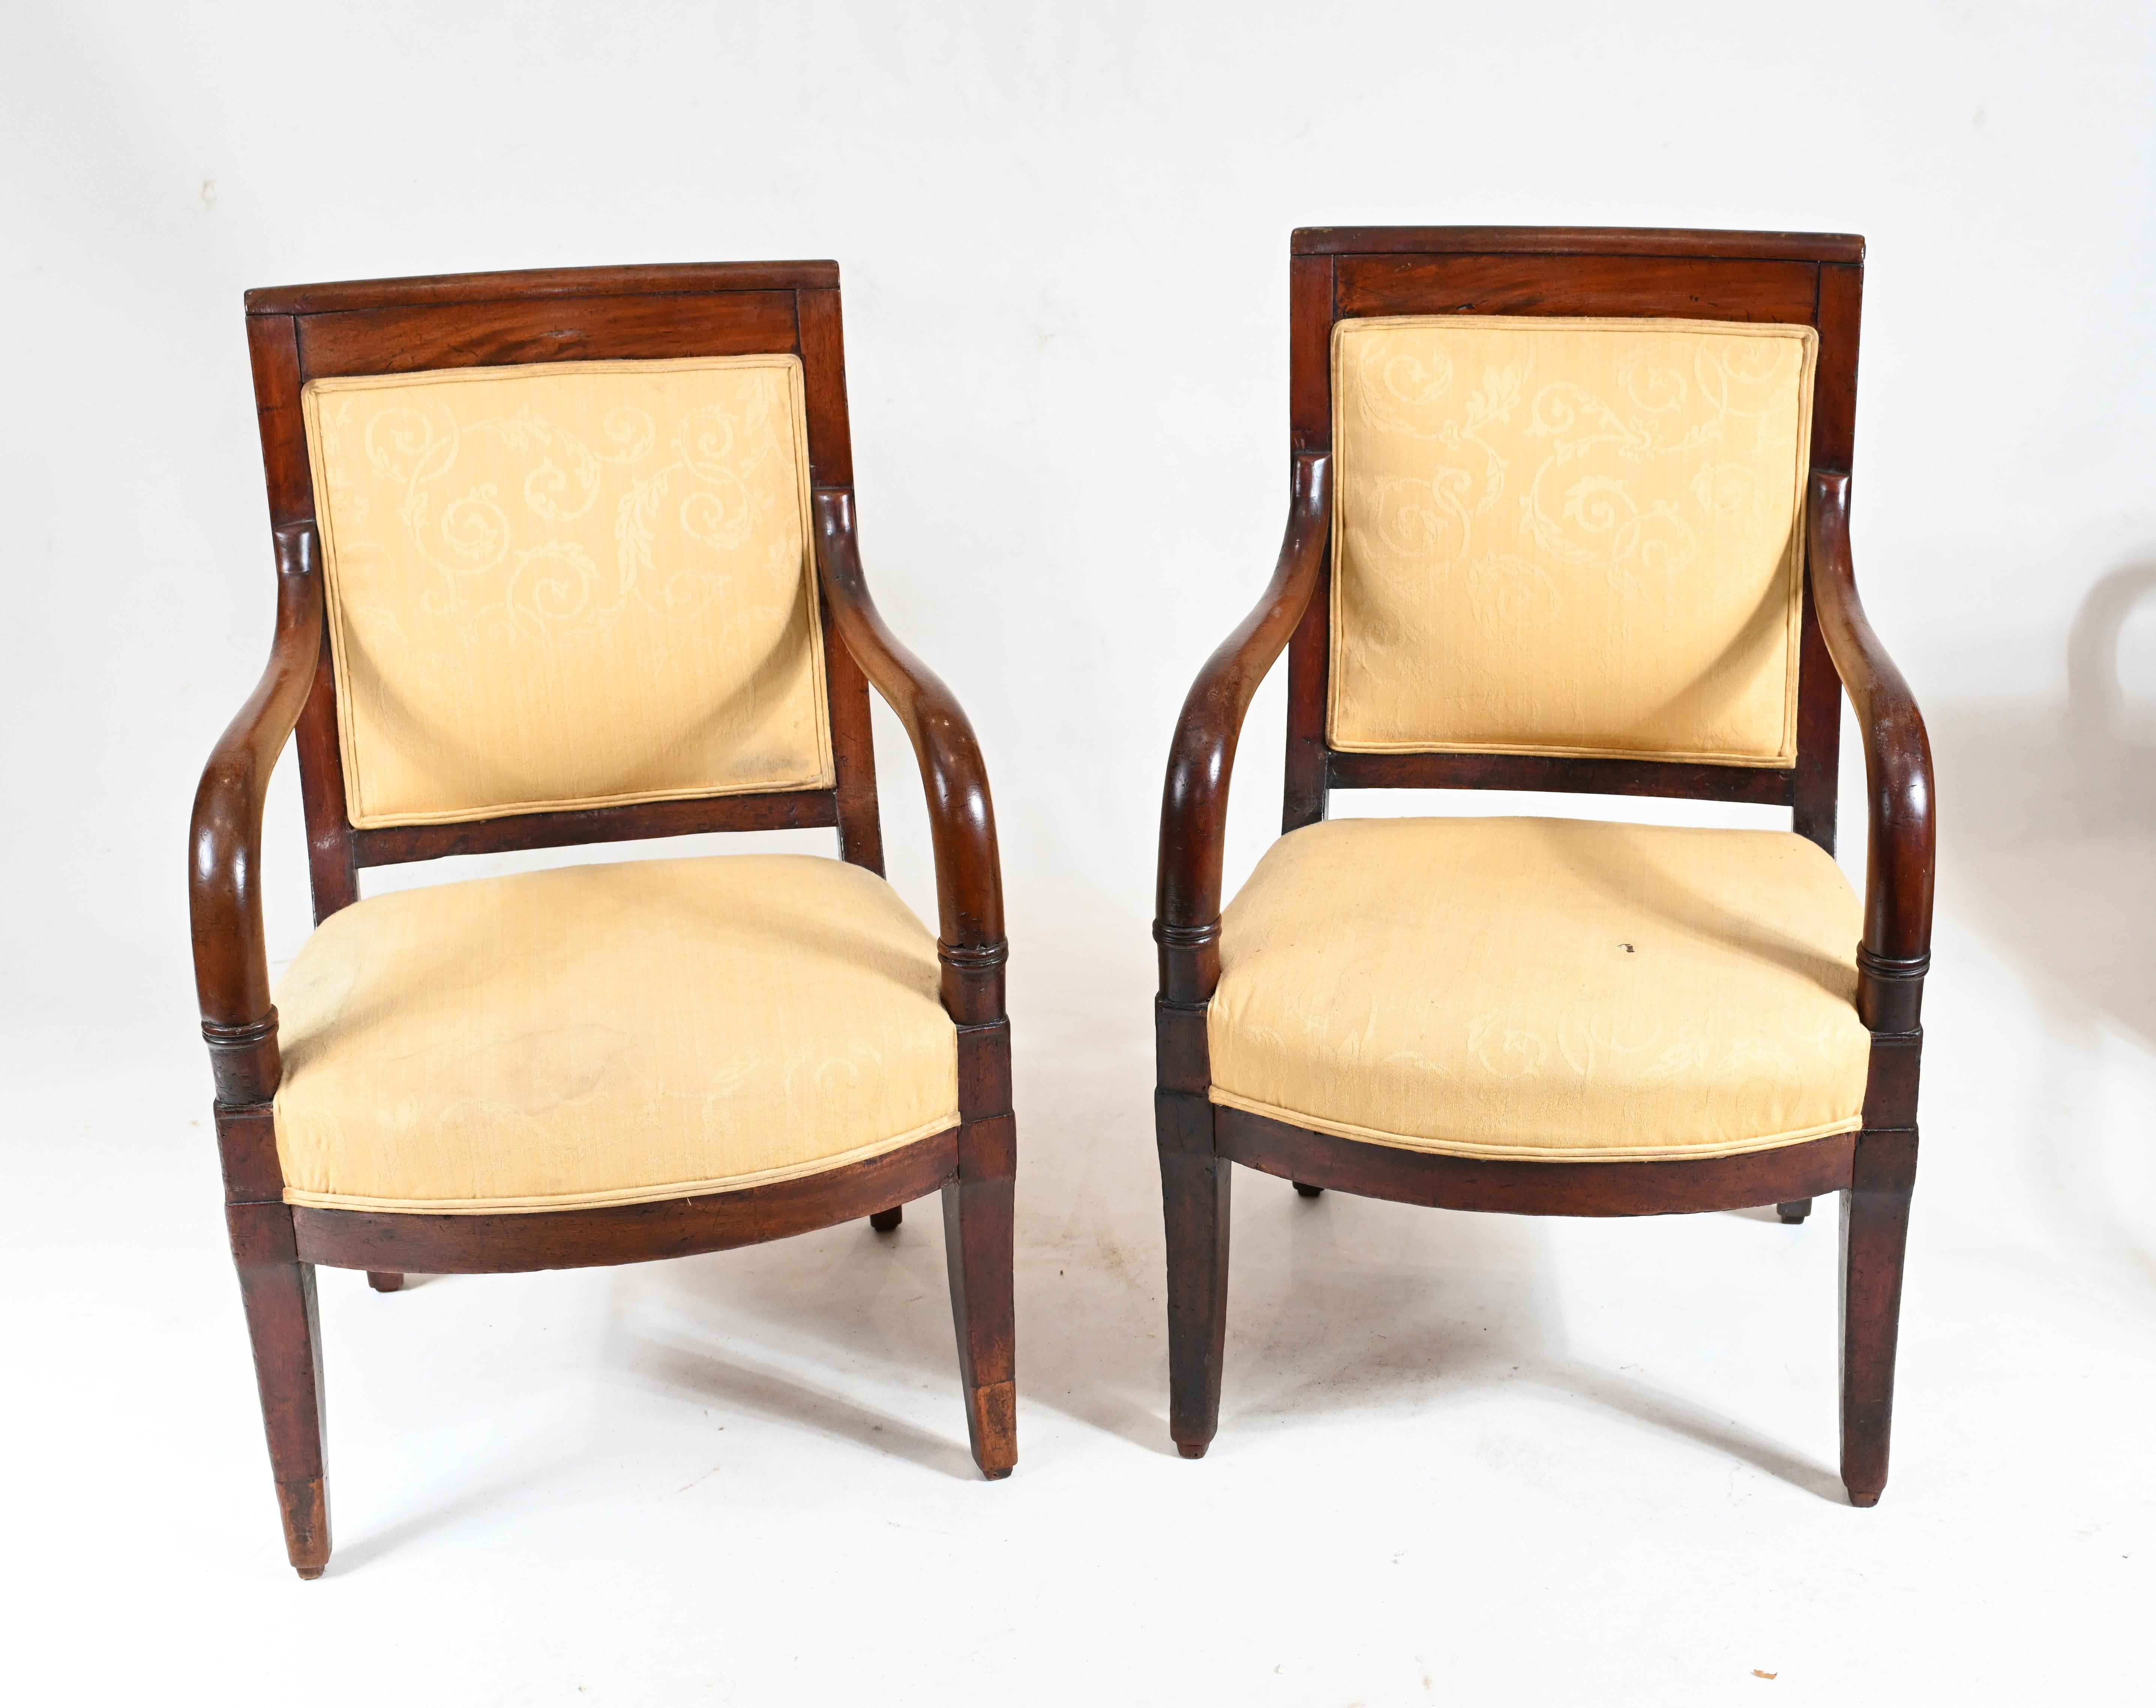 Elegant pair of French antique arm chairs in the Empire manner
This pair date to circa 1880
Bought from a dealer on Marche Biron at Paris antiques markets
We can ship to anywhere in the world 
Offered in great shape ready for home use right away.